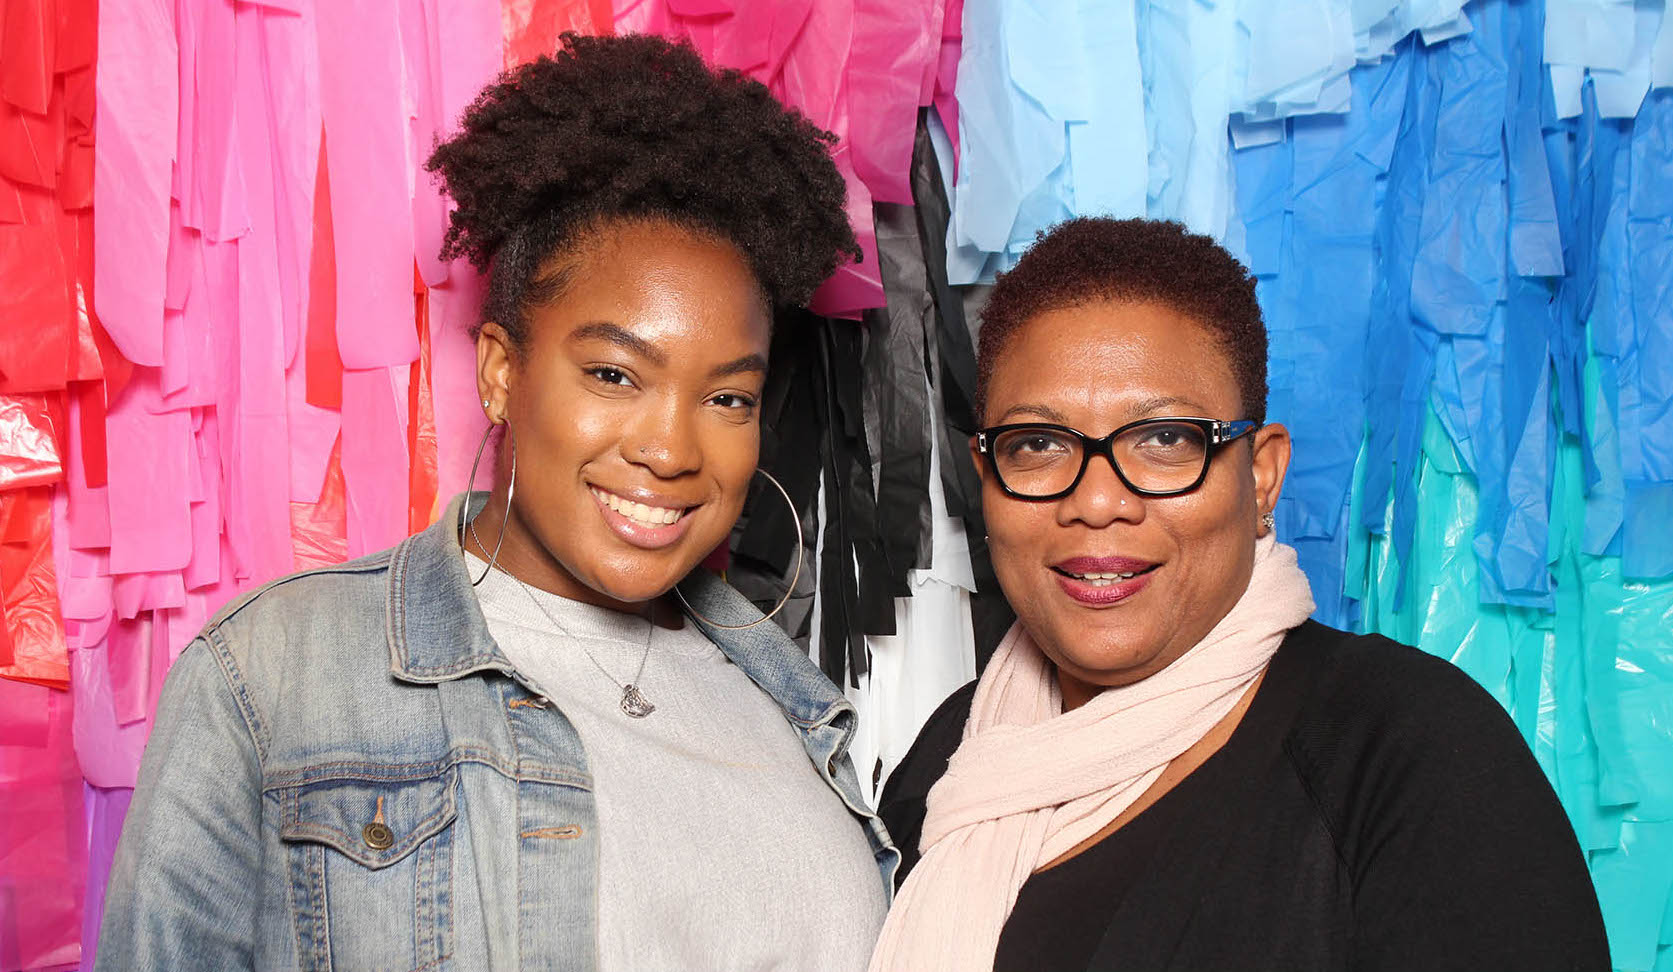 Mother and daughter pose in front of colorful crepe paper backdrop